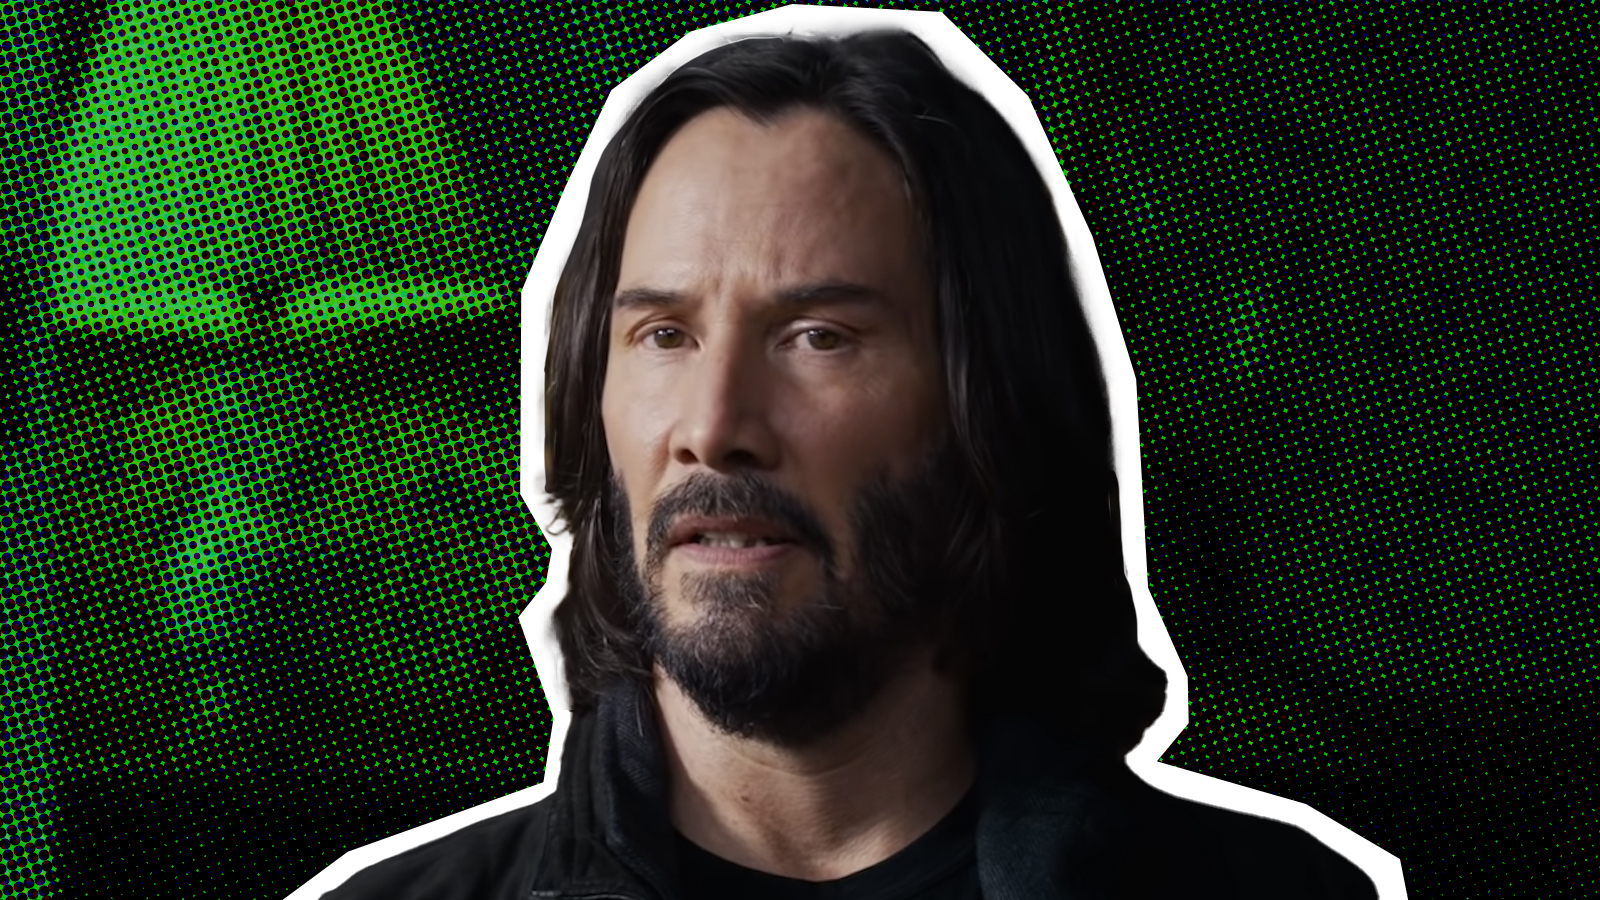 Keanu Reeves Was ‘Forced’ To Do The Worst Film Of His Career, He Claims